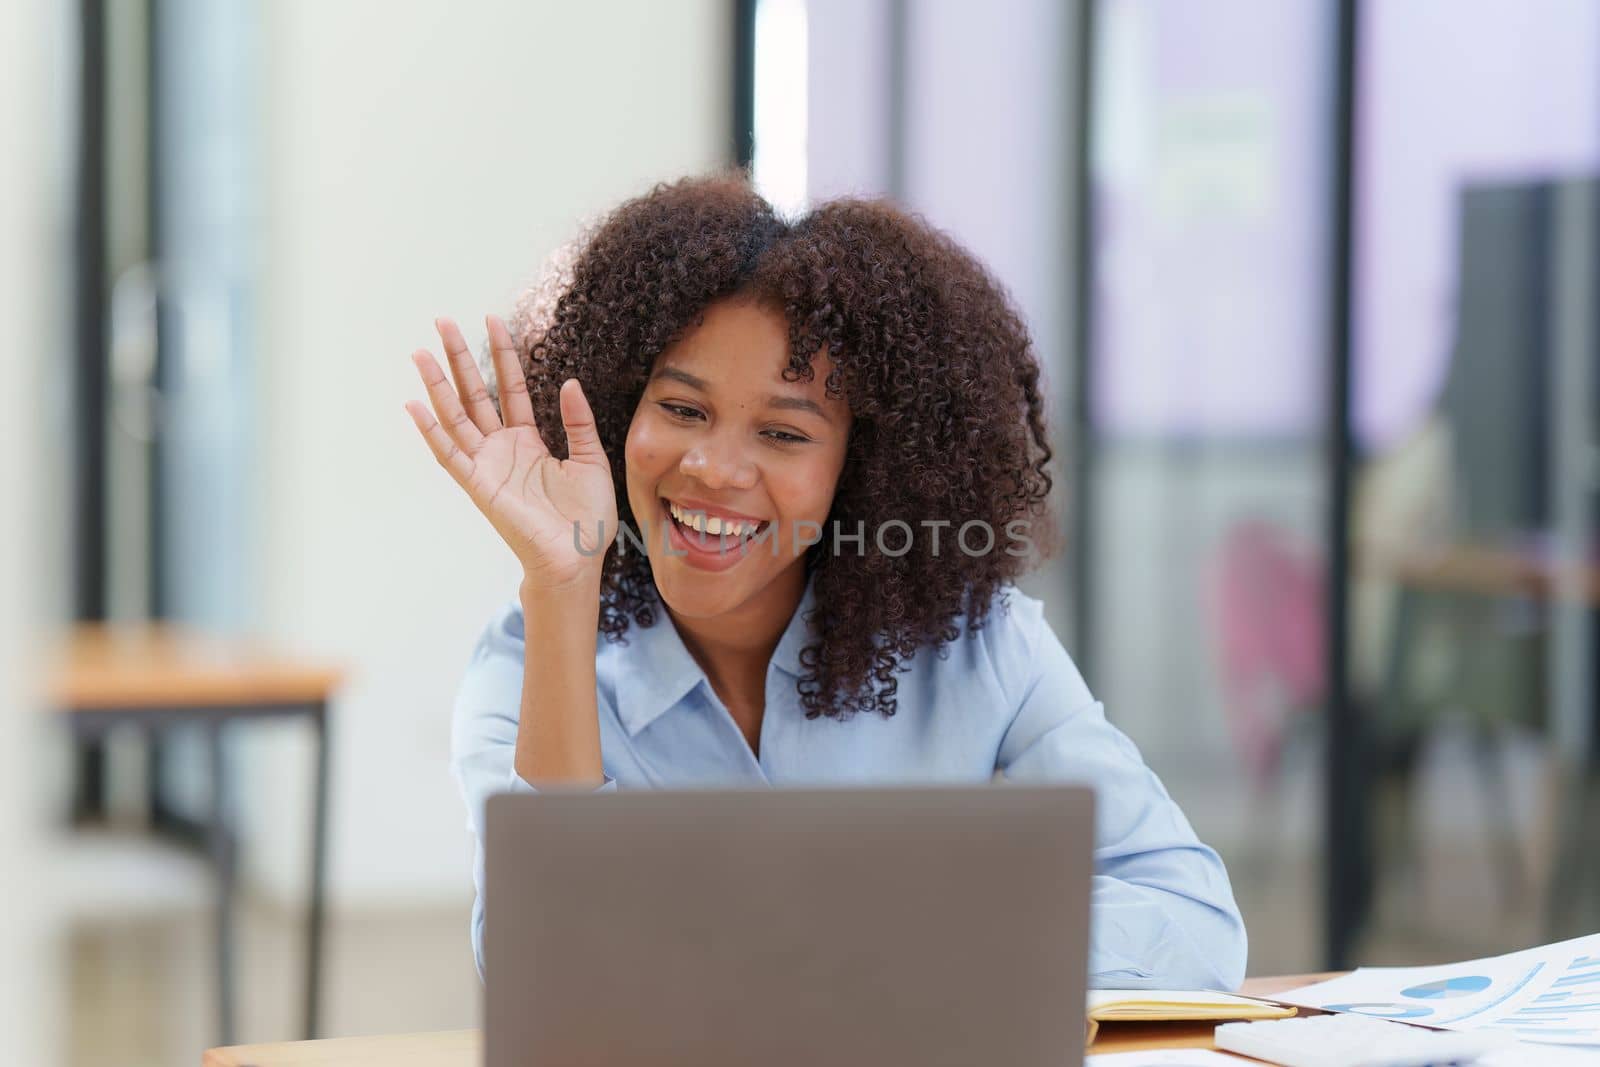 Attractive black businesswoman using laptop video conference call, business colleagues. Communicating with team by itchaznong